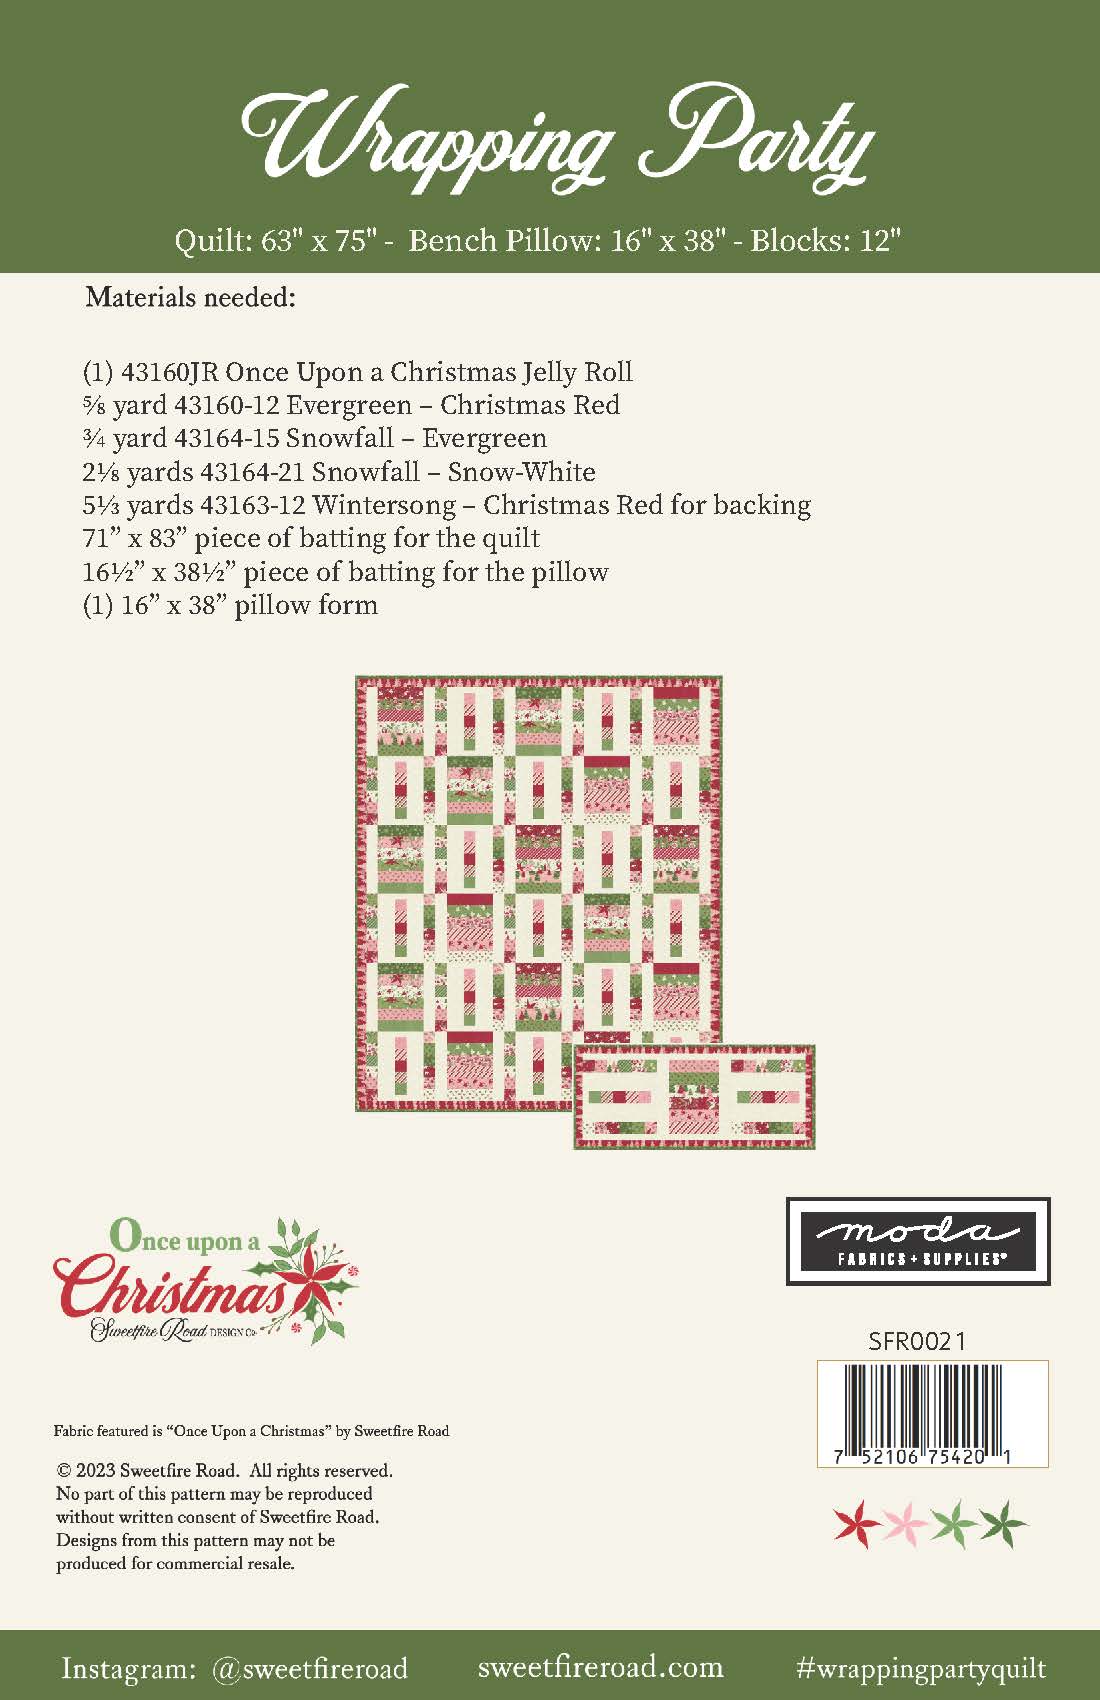 NEW! Once Upon a Christmas "Wrapping Party" Quilt Pattern + Bench Pillow Pattern (Downloadable PDF)